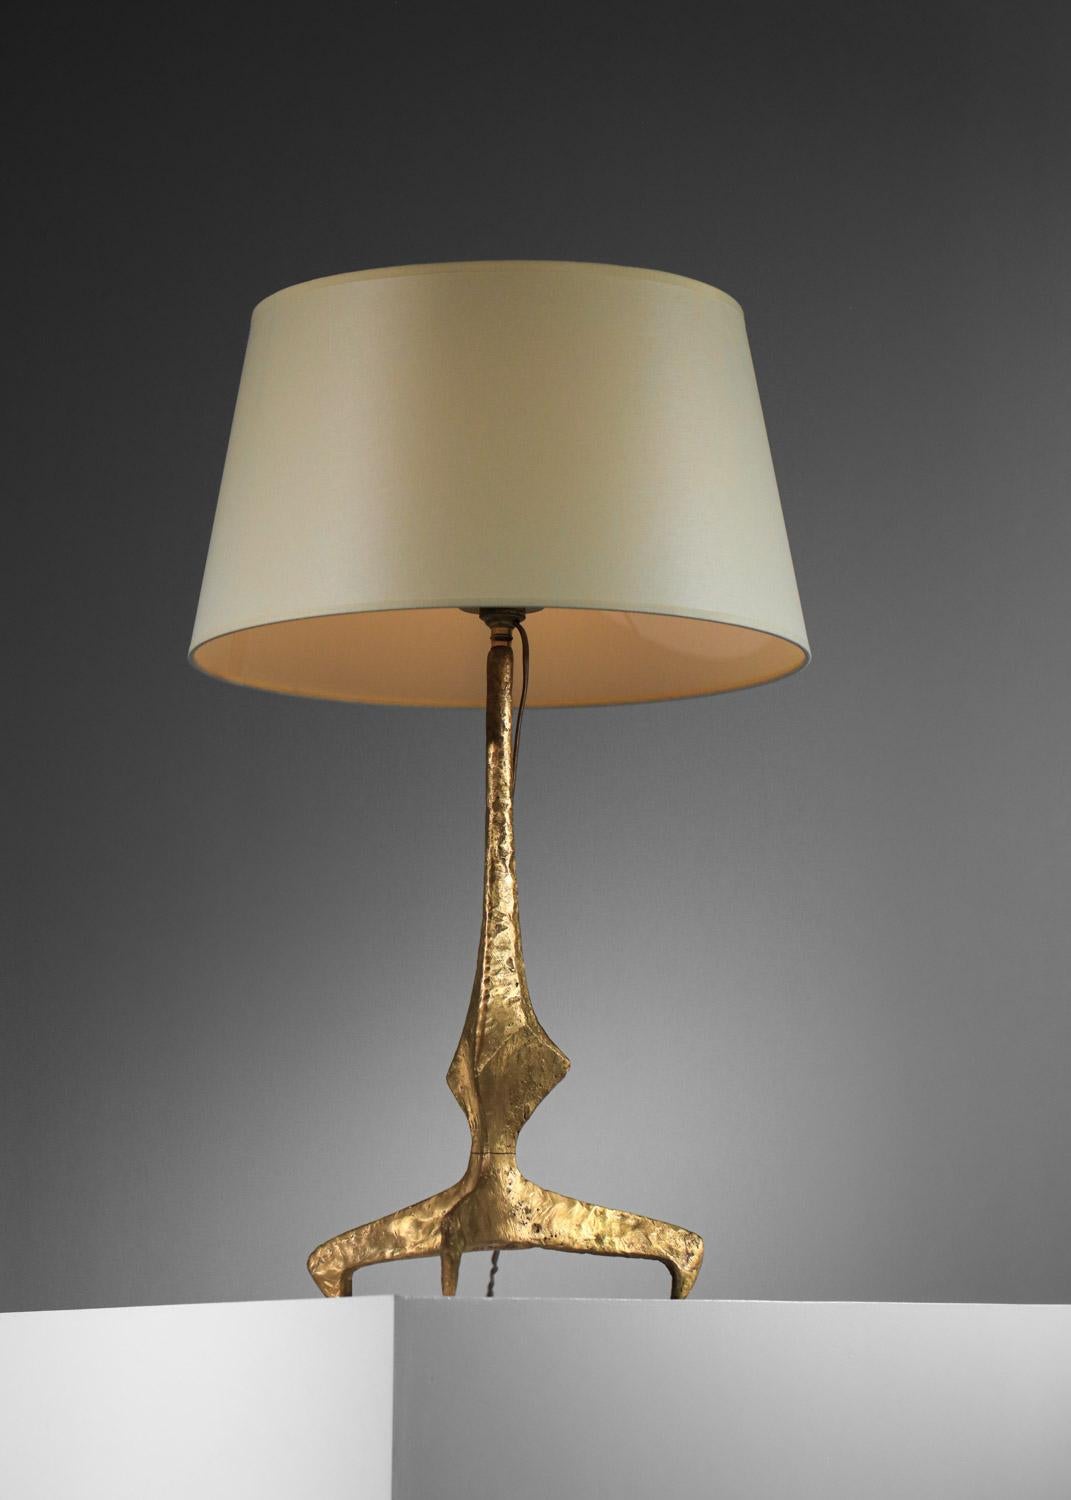 Mid-20th Century Gilt bronze table lamp in the Felix Agostini style, tripod-shaped  For Sale